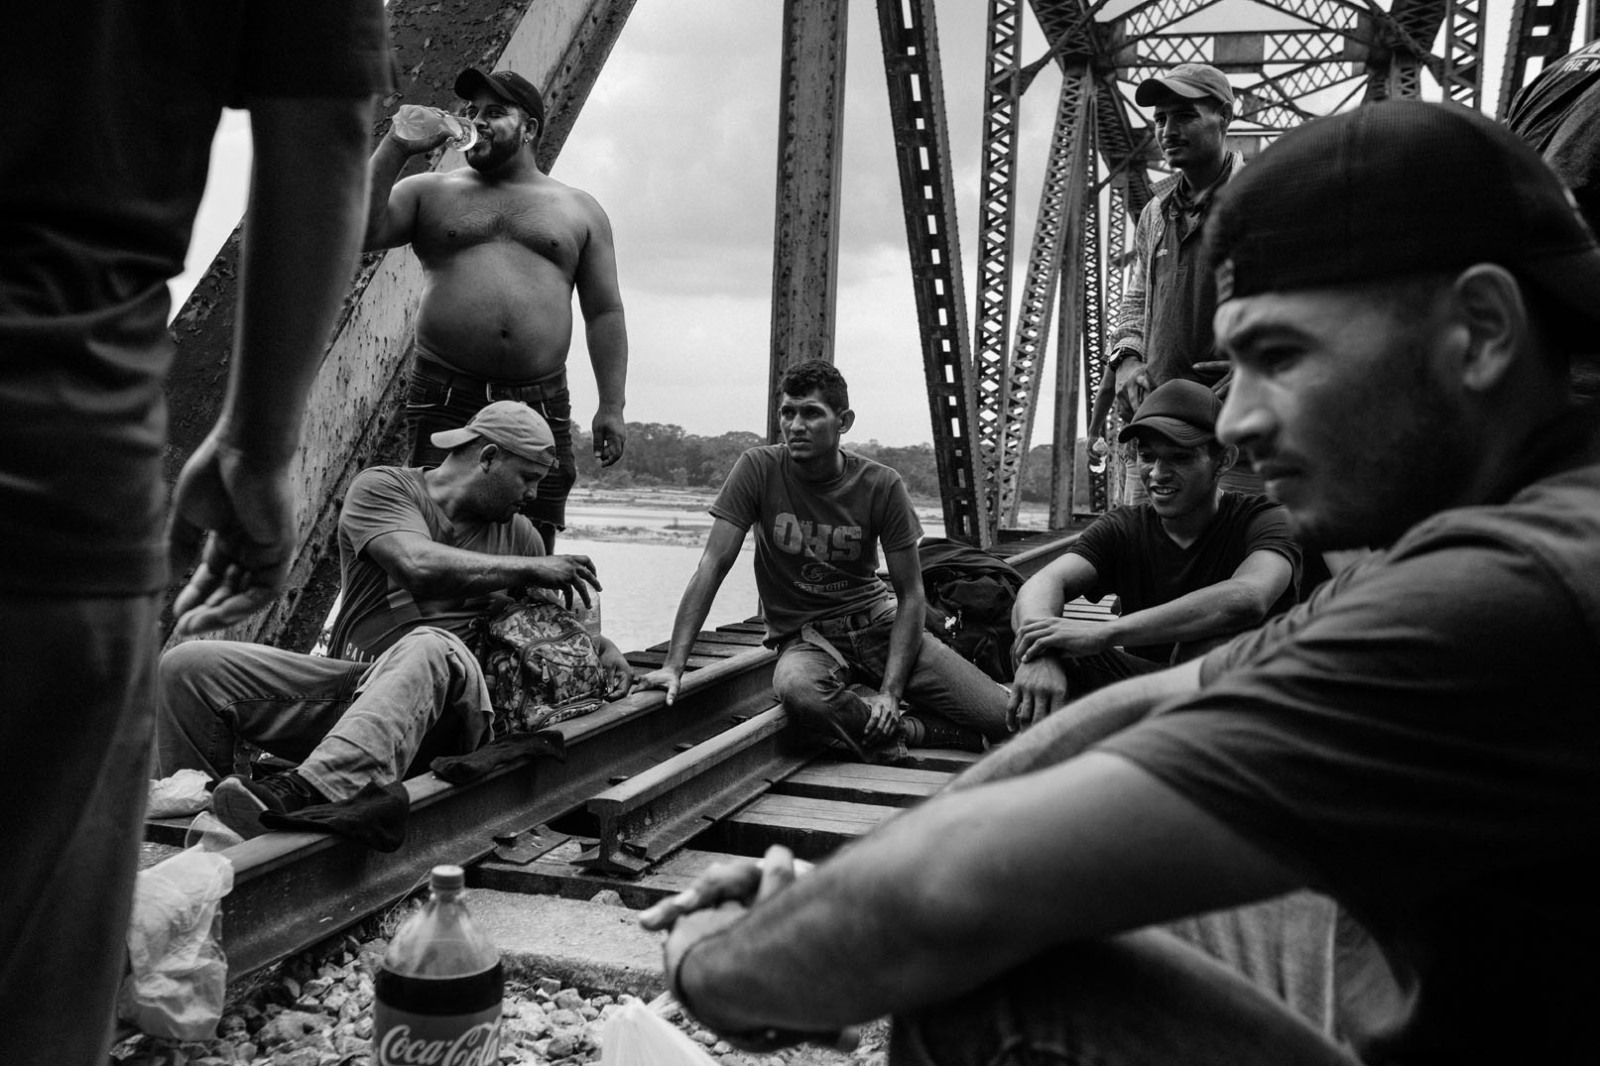 People from Honduras rest on a bridge along a migration route in San Manuel, Tabasco, Mexico, on March 6, 2021.
In 2021 the photographer started a seven-month journey along the migration routes of Central America, Mexico, and the United States as part of an investigation on the migrations across the American continent. 
In the Mexican states of Chiapas, Tabasco, and Veracruz, the work was possible thanks to the support of Mexican activists who monitored the routes people pace on their northward journey, assisting them with food and medicines.